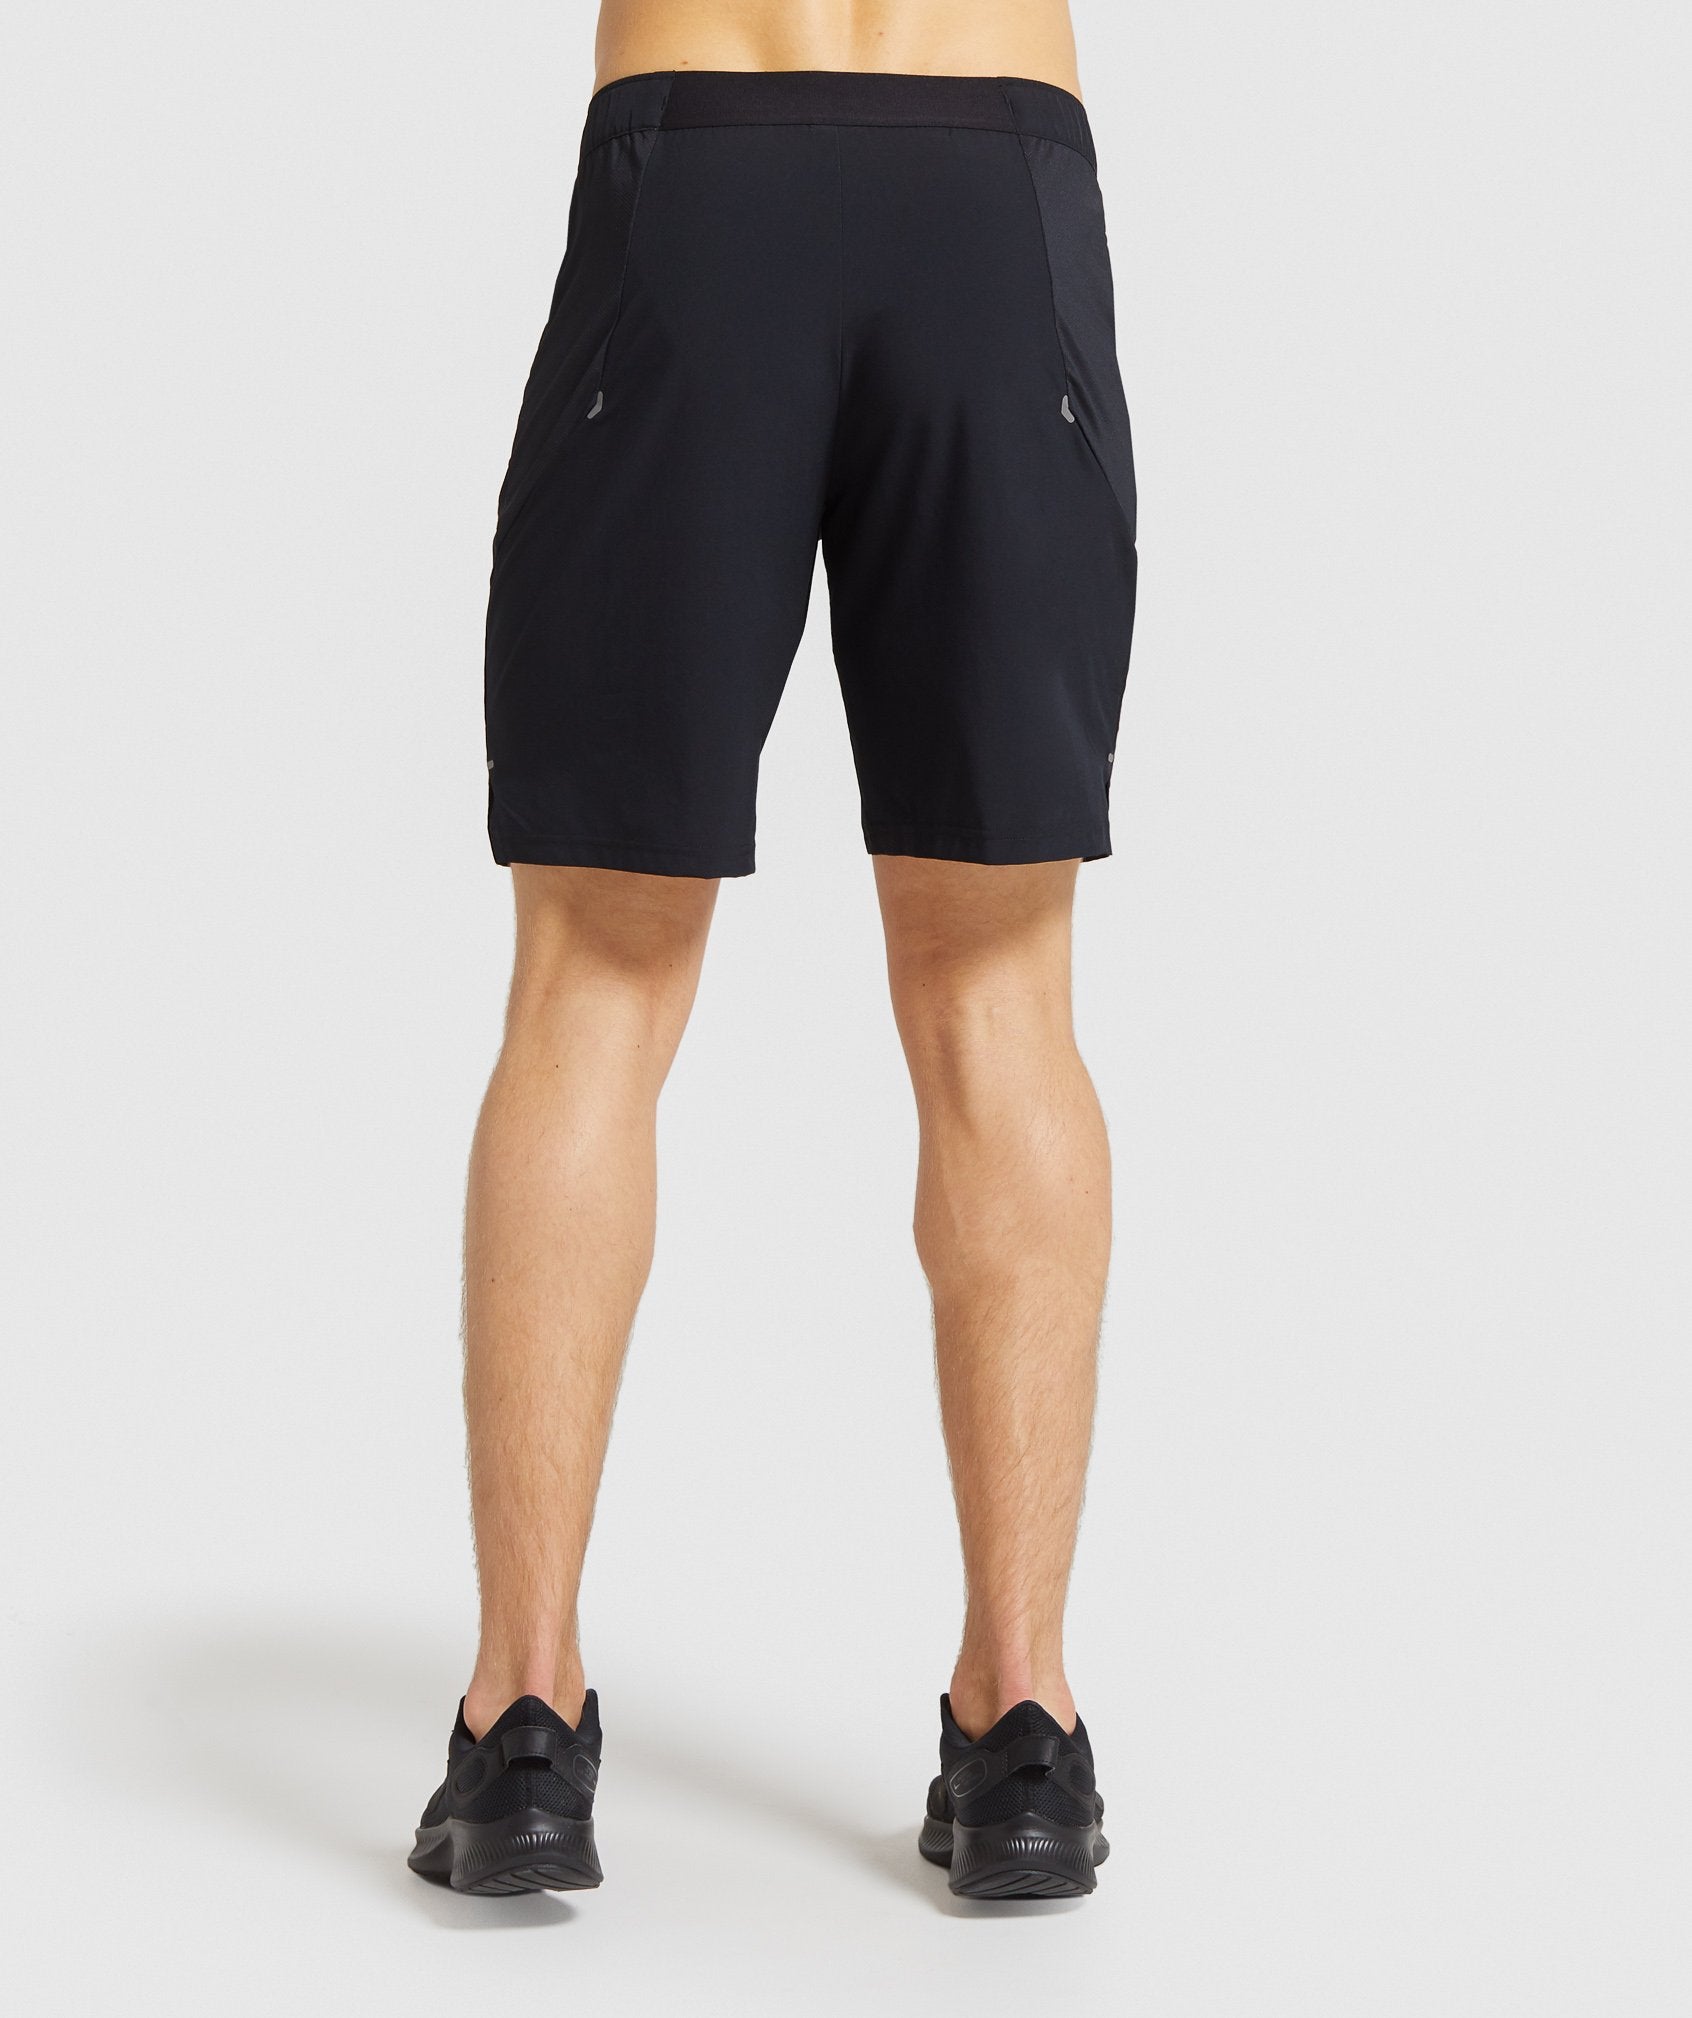 Element Hiit 9" Shorts in Black - view 2